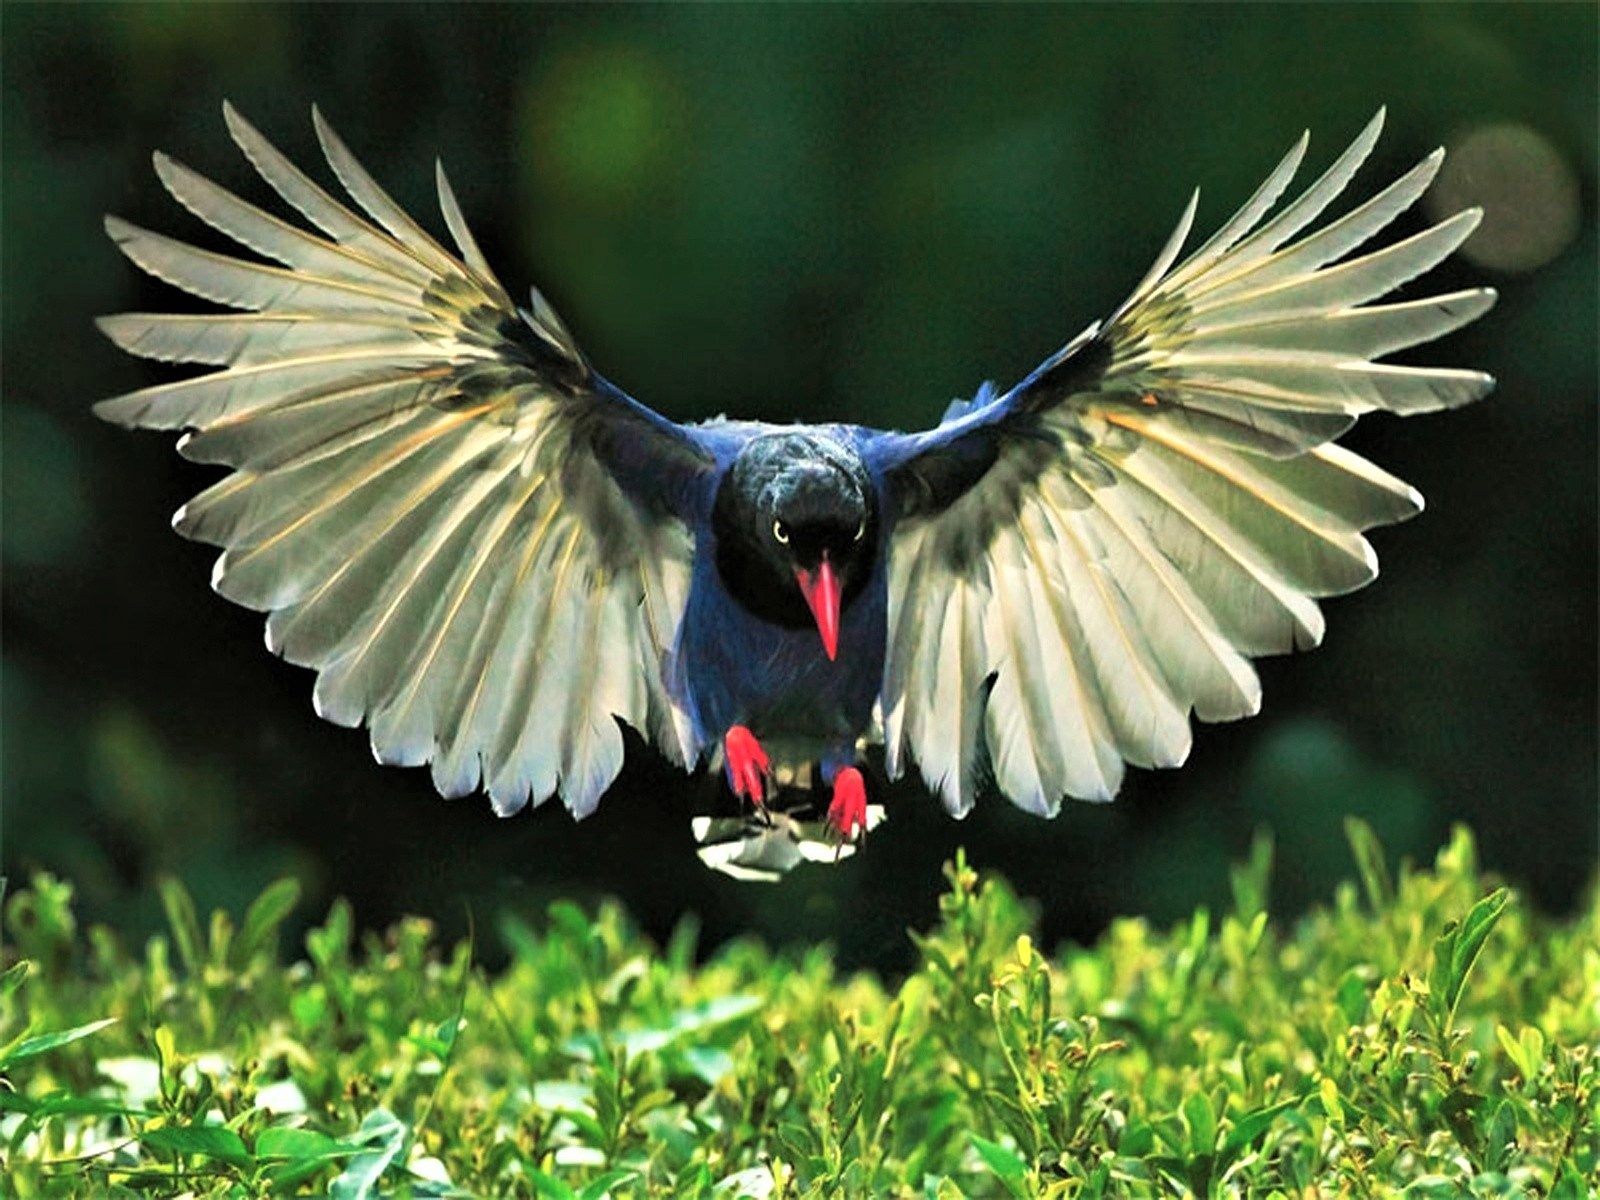 Magpie Spreading Its Wings